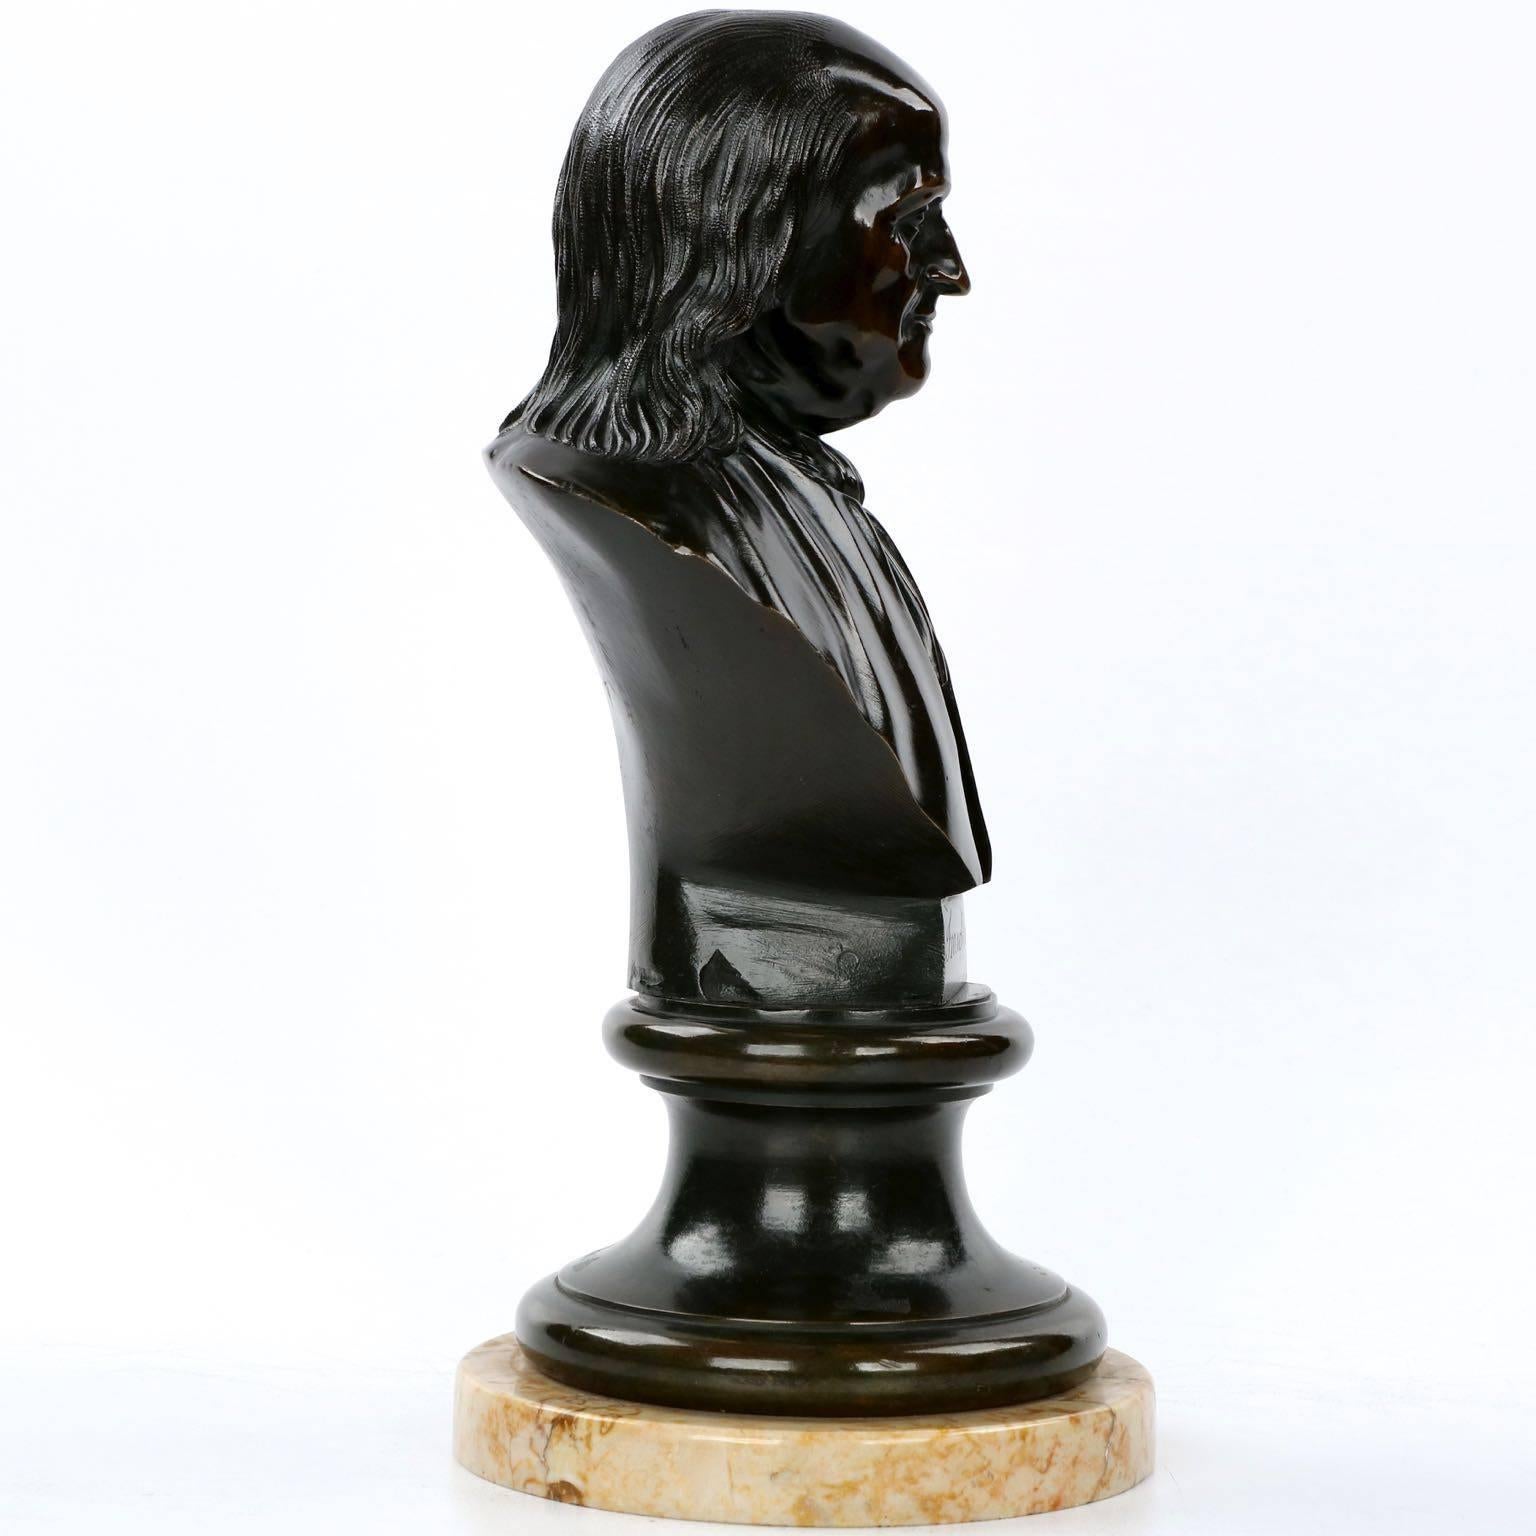 A most crisp casting of Benjamin Franklin, this gorgeous work of art features a surface positively devoid of casting blemish, the chasing and filing of details indicative of a highly skilled finisher. His hair is chiseled with such clarity, the